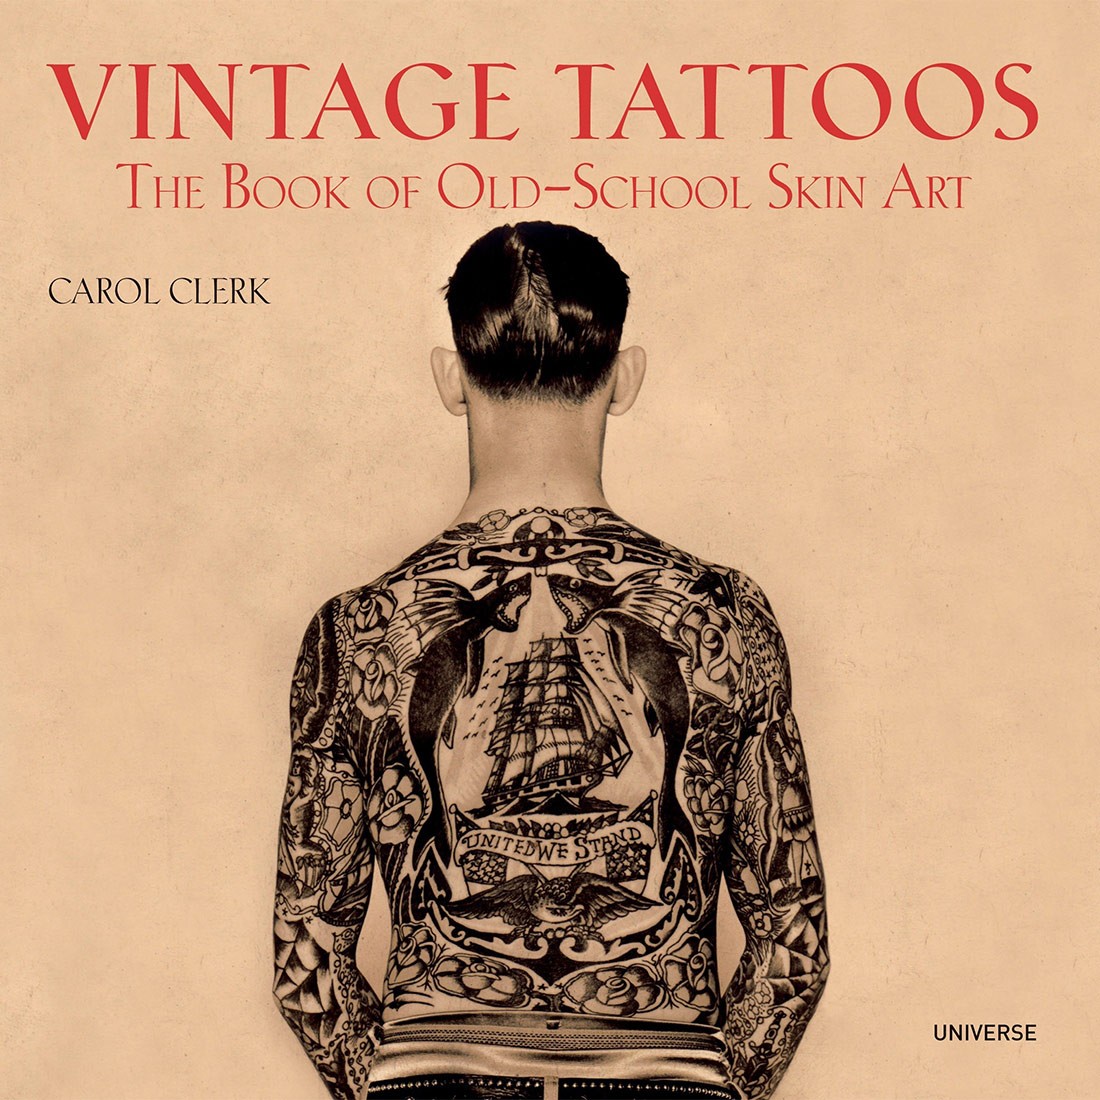 Vintage Tattoos The Book of Old School Skin art Paperback Book yellow tan